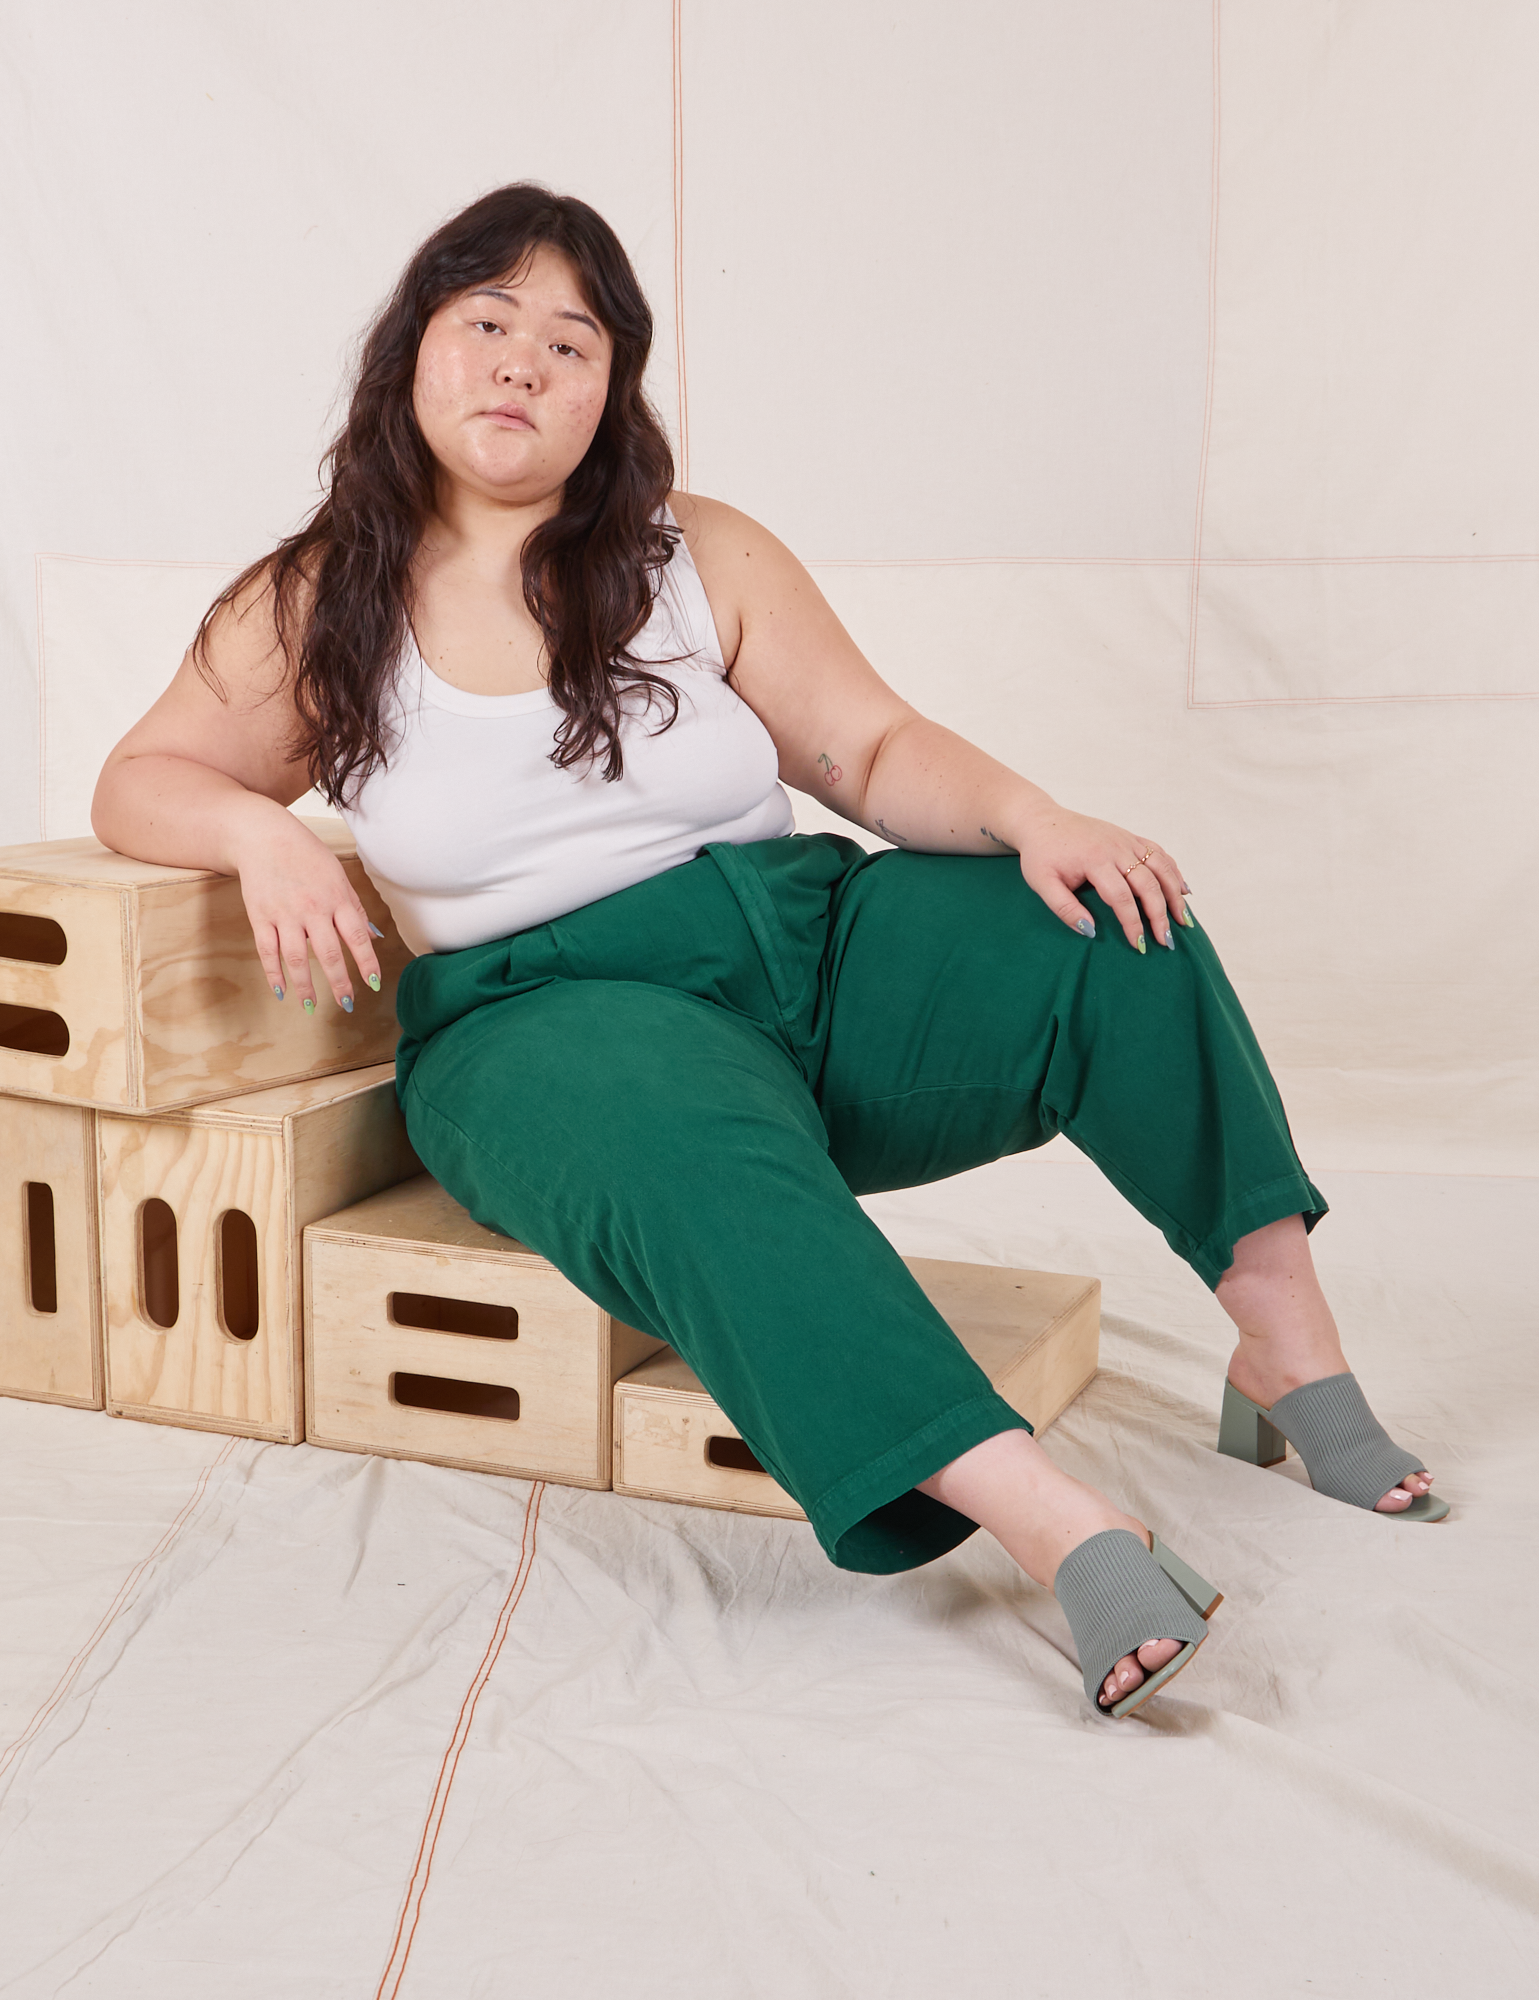 Ashley is wearing Heavyweight Trousers in Hunter Green and vintage off-white Cropped Tank Top